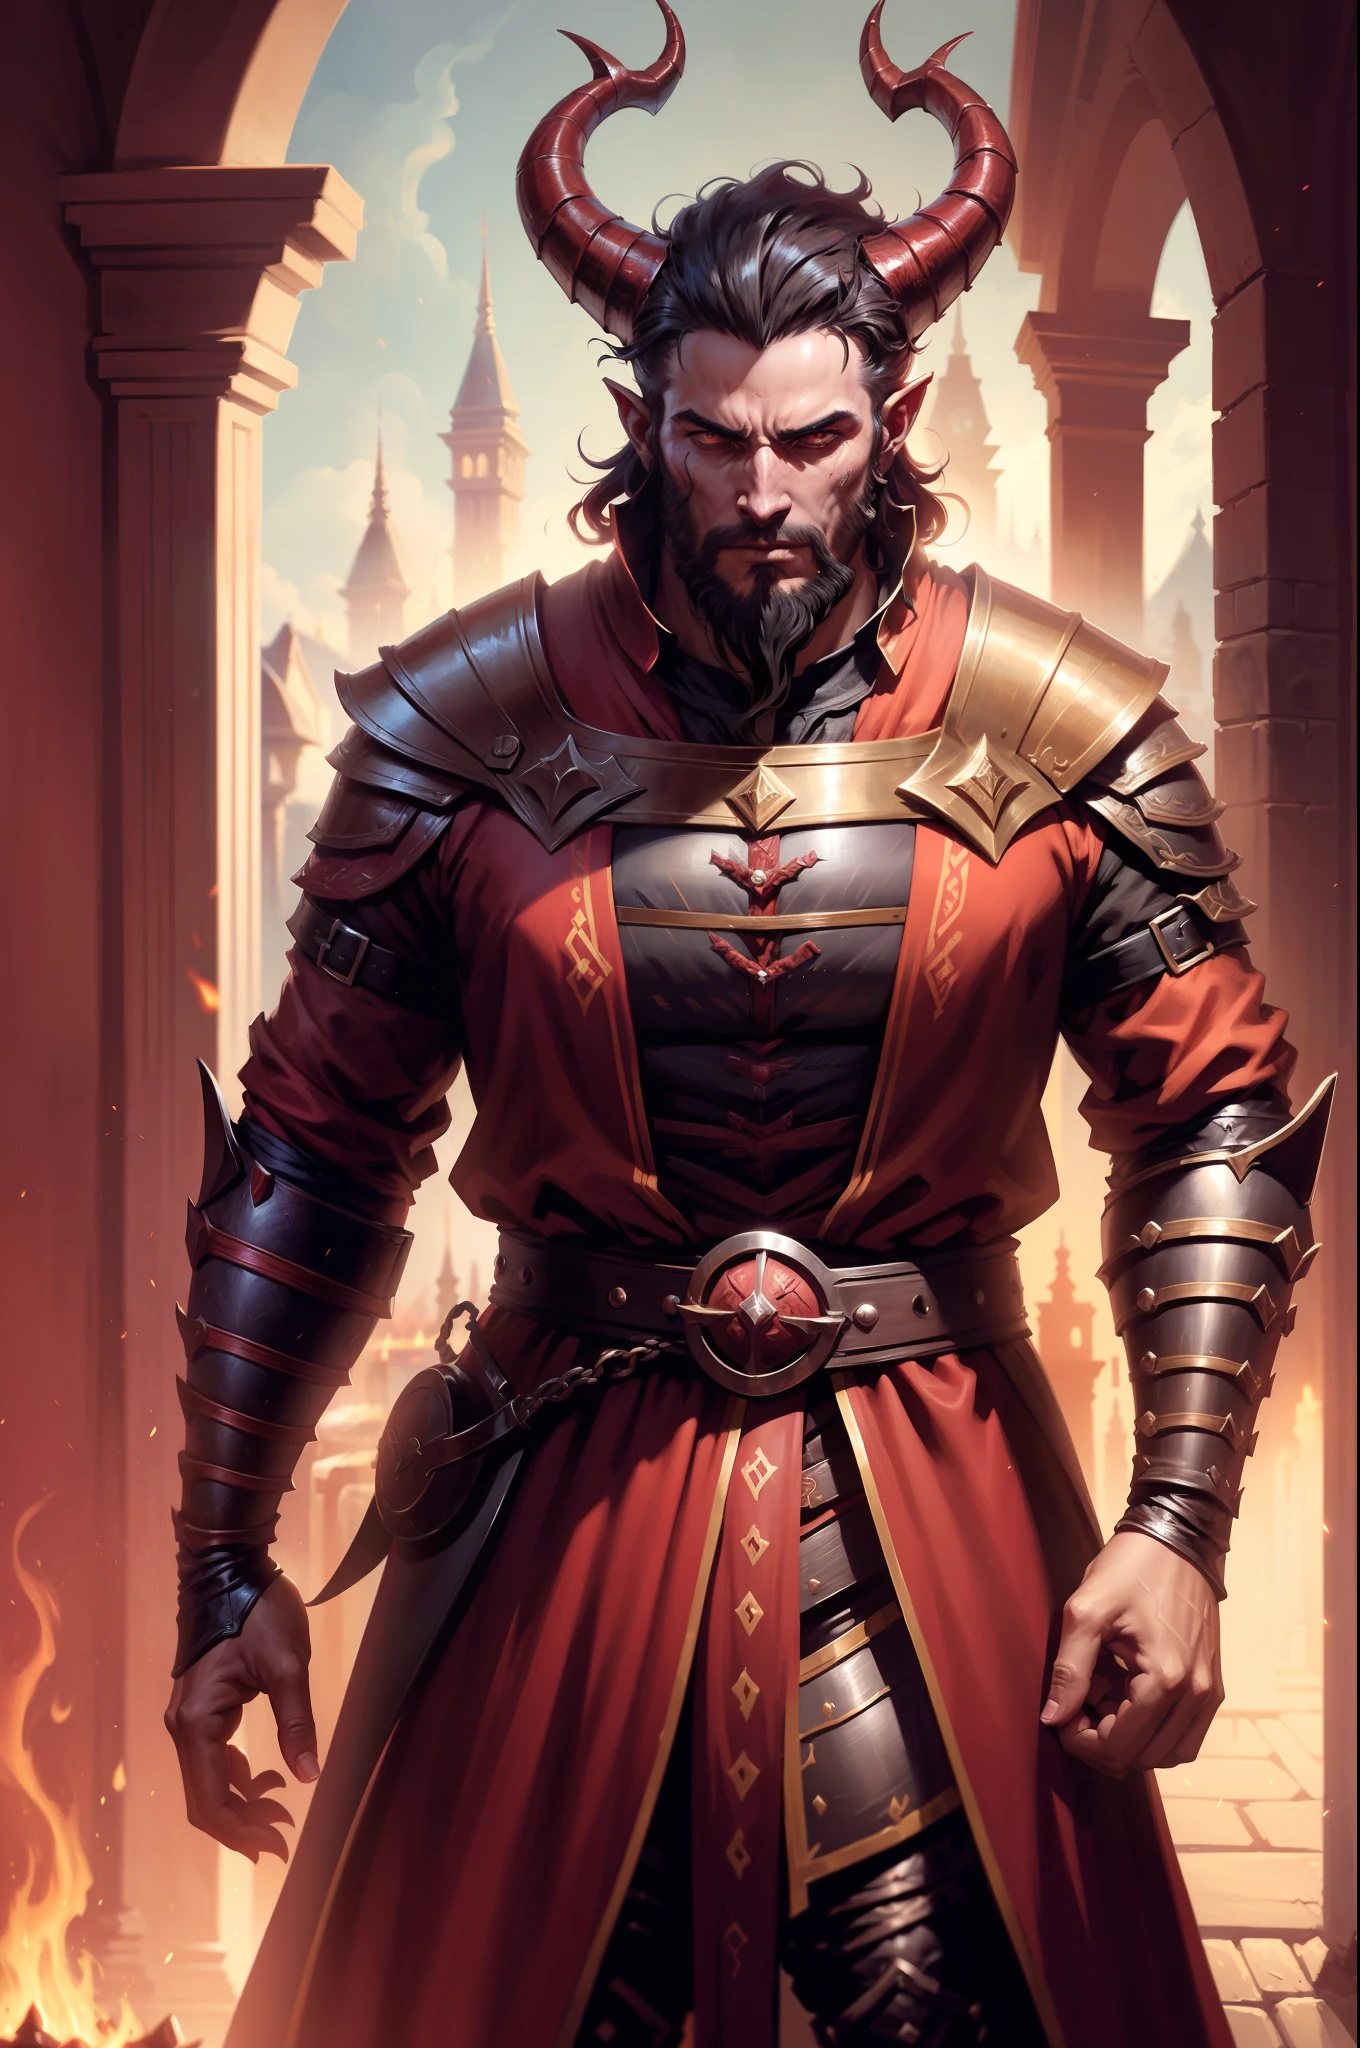 "(1 man with demonic horns+0.9 big hair and beard:0.9+1medieval knight), hell fire, vibrant ray, blood splattered, fully body, Diablo&#39;s dark style, tiefling d&d".